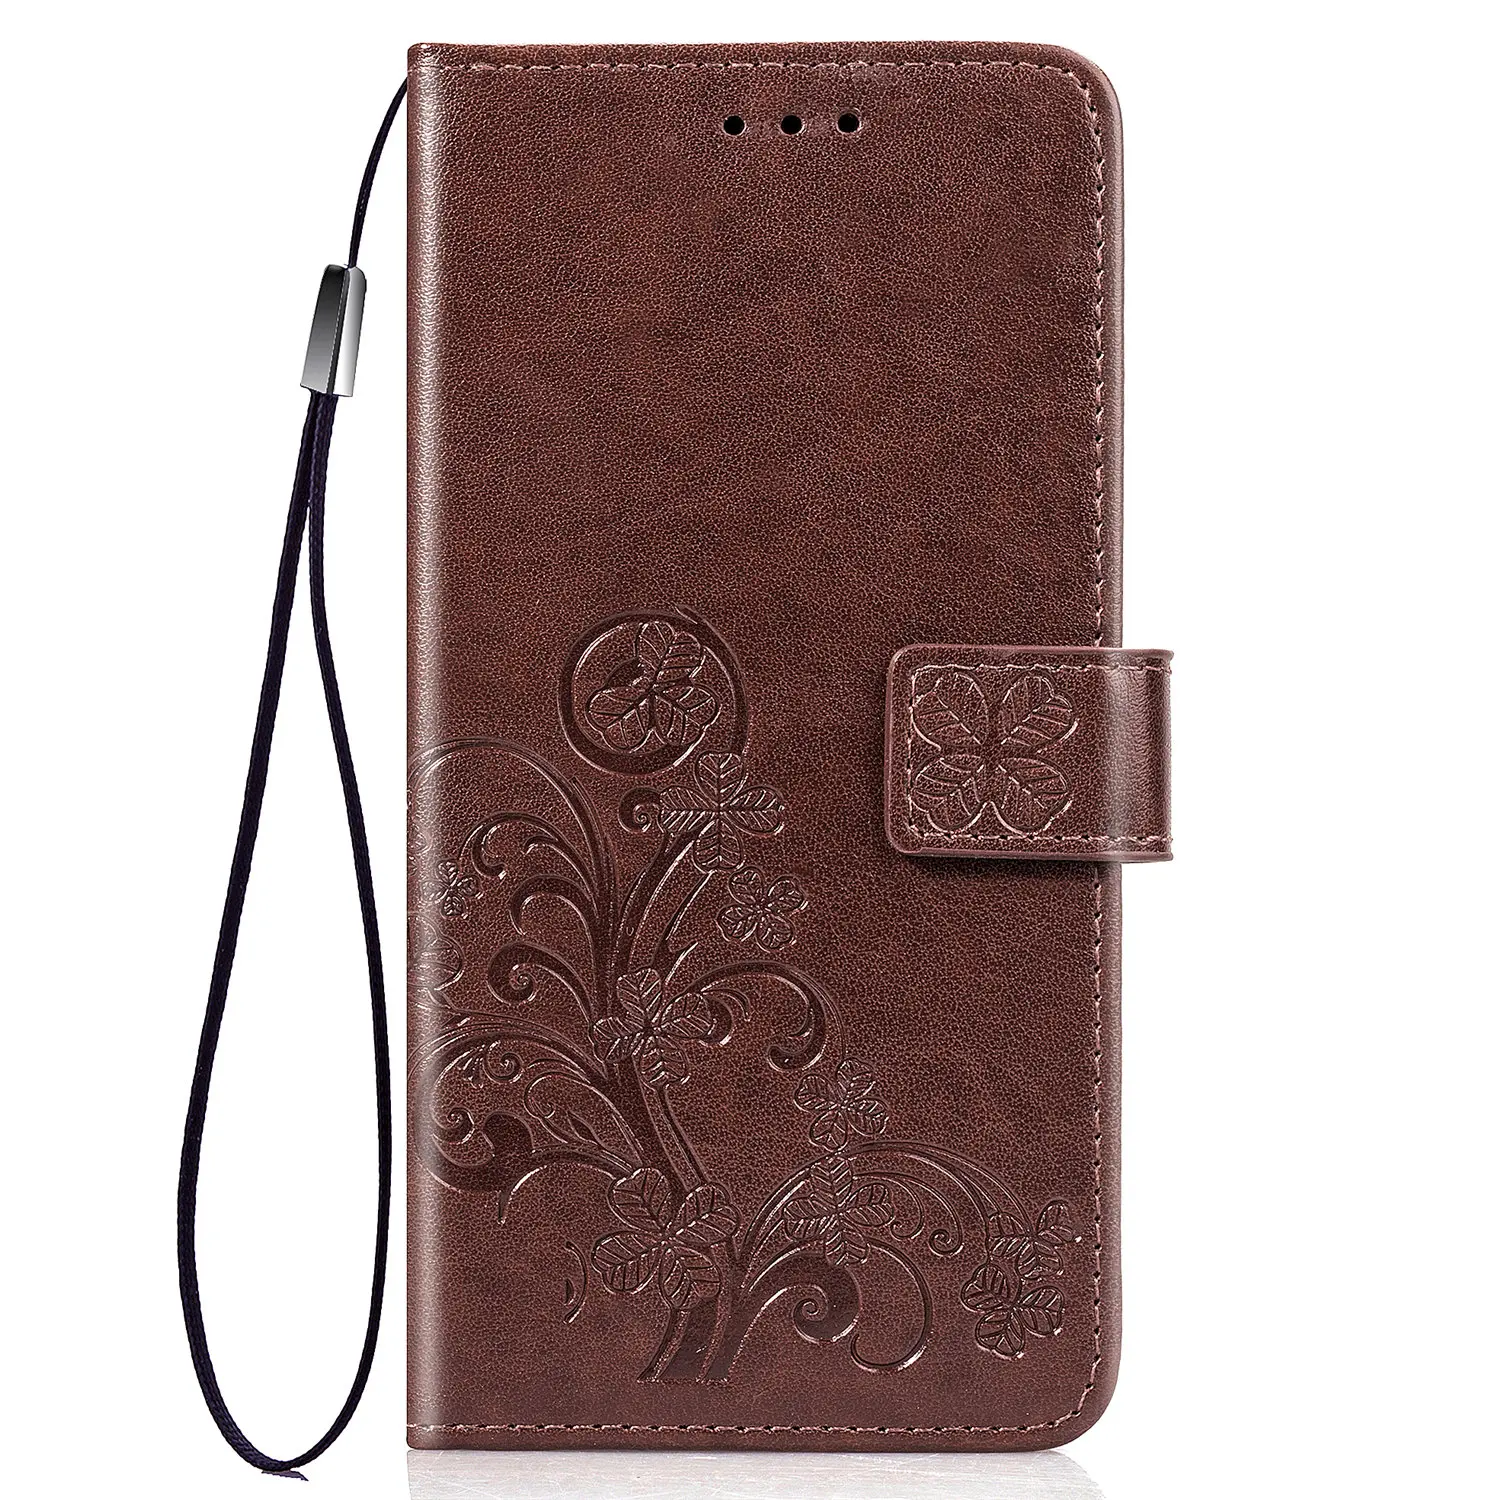 Flip Case For LG X power K5 K4 2017 K8 K10 2018 V10 V20 Q6 G3 G4 G5 Spirit PU Leather+Wallet Cover For LG Leon Case Phone